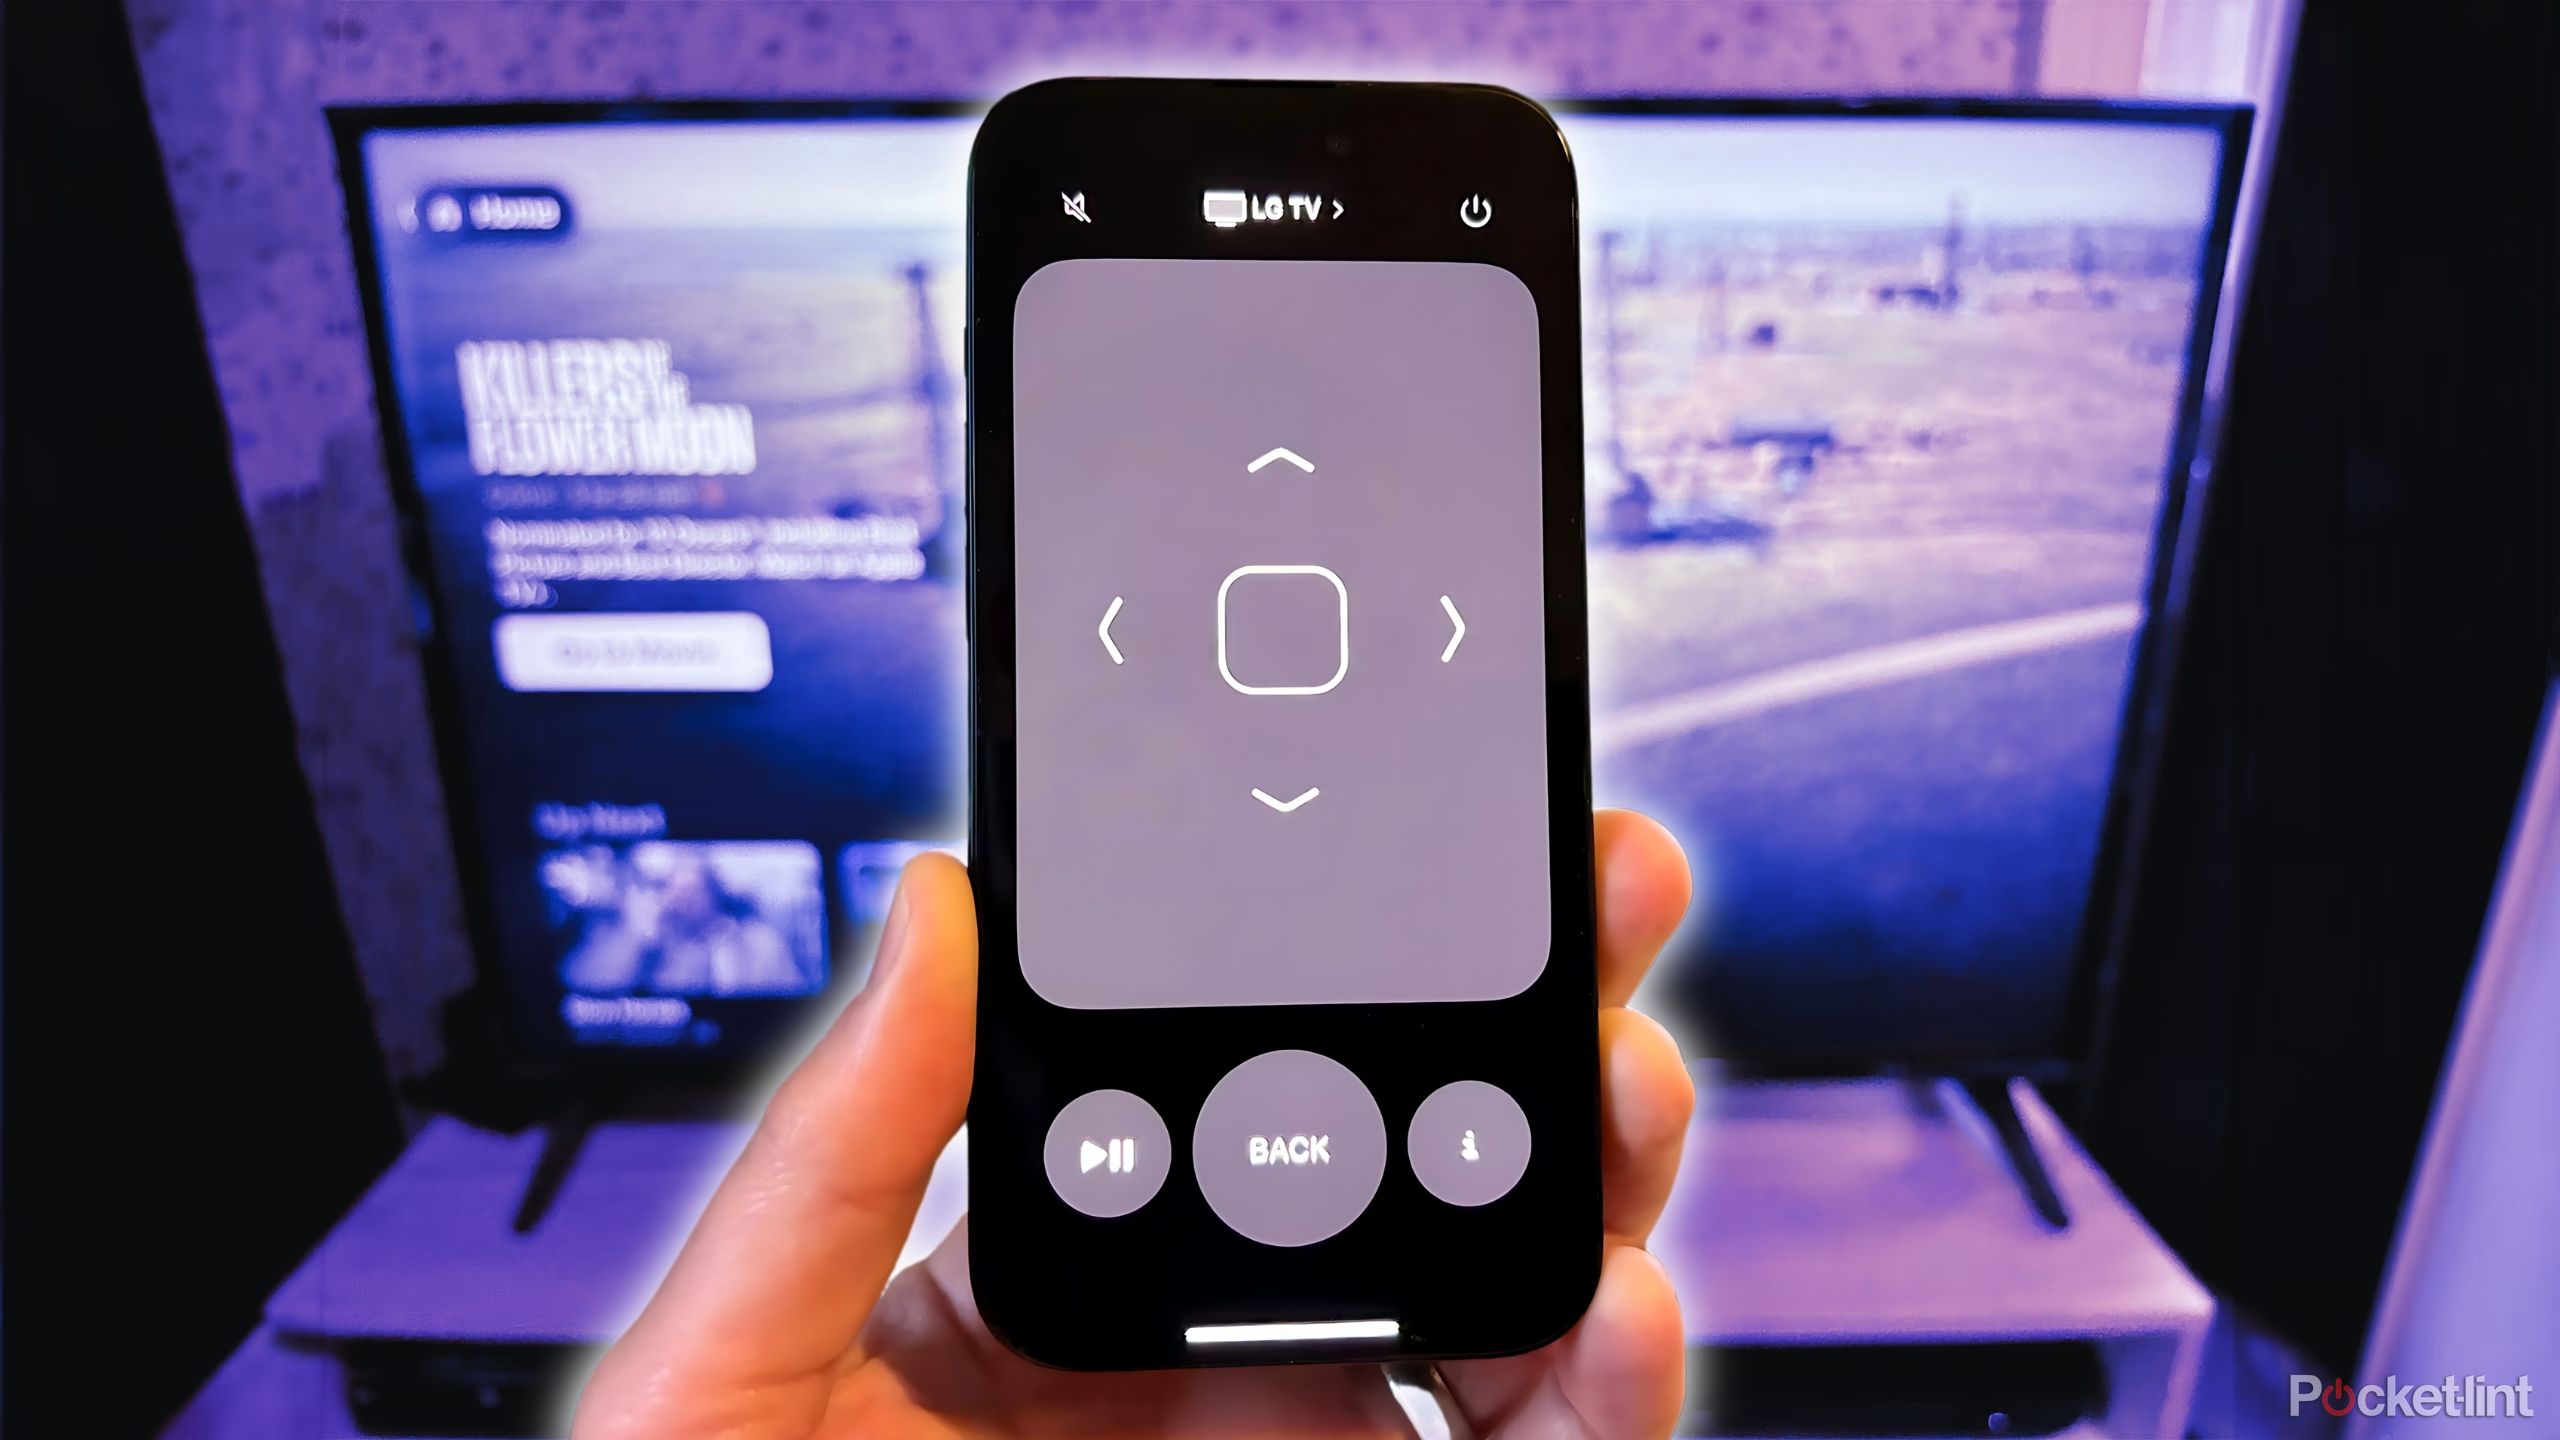 iPhone being used as Apple TV remote